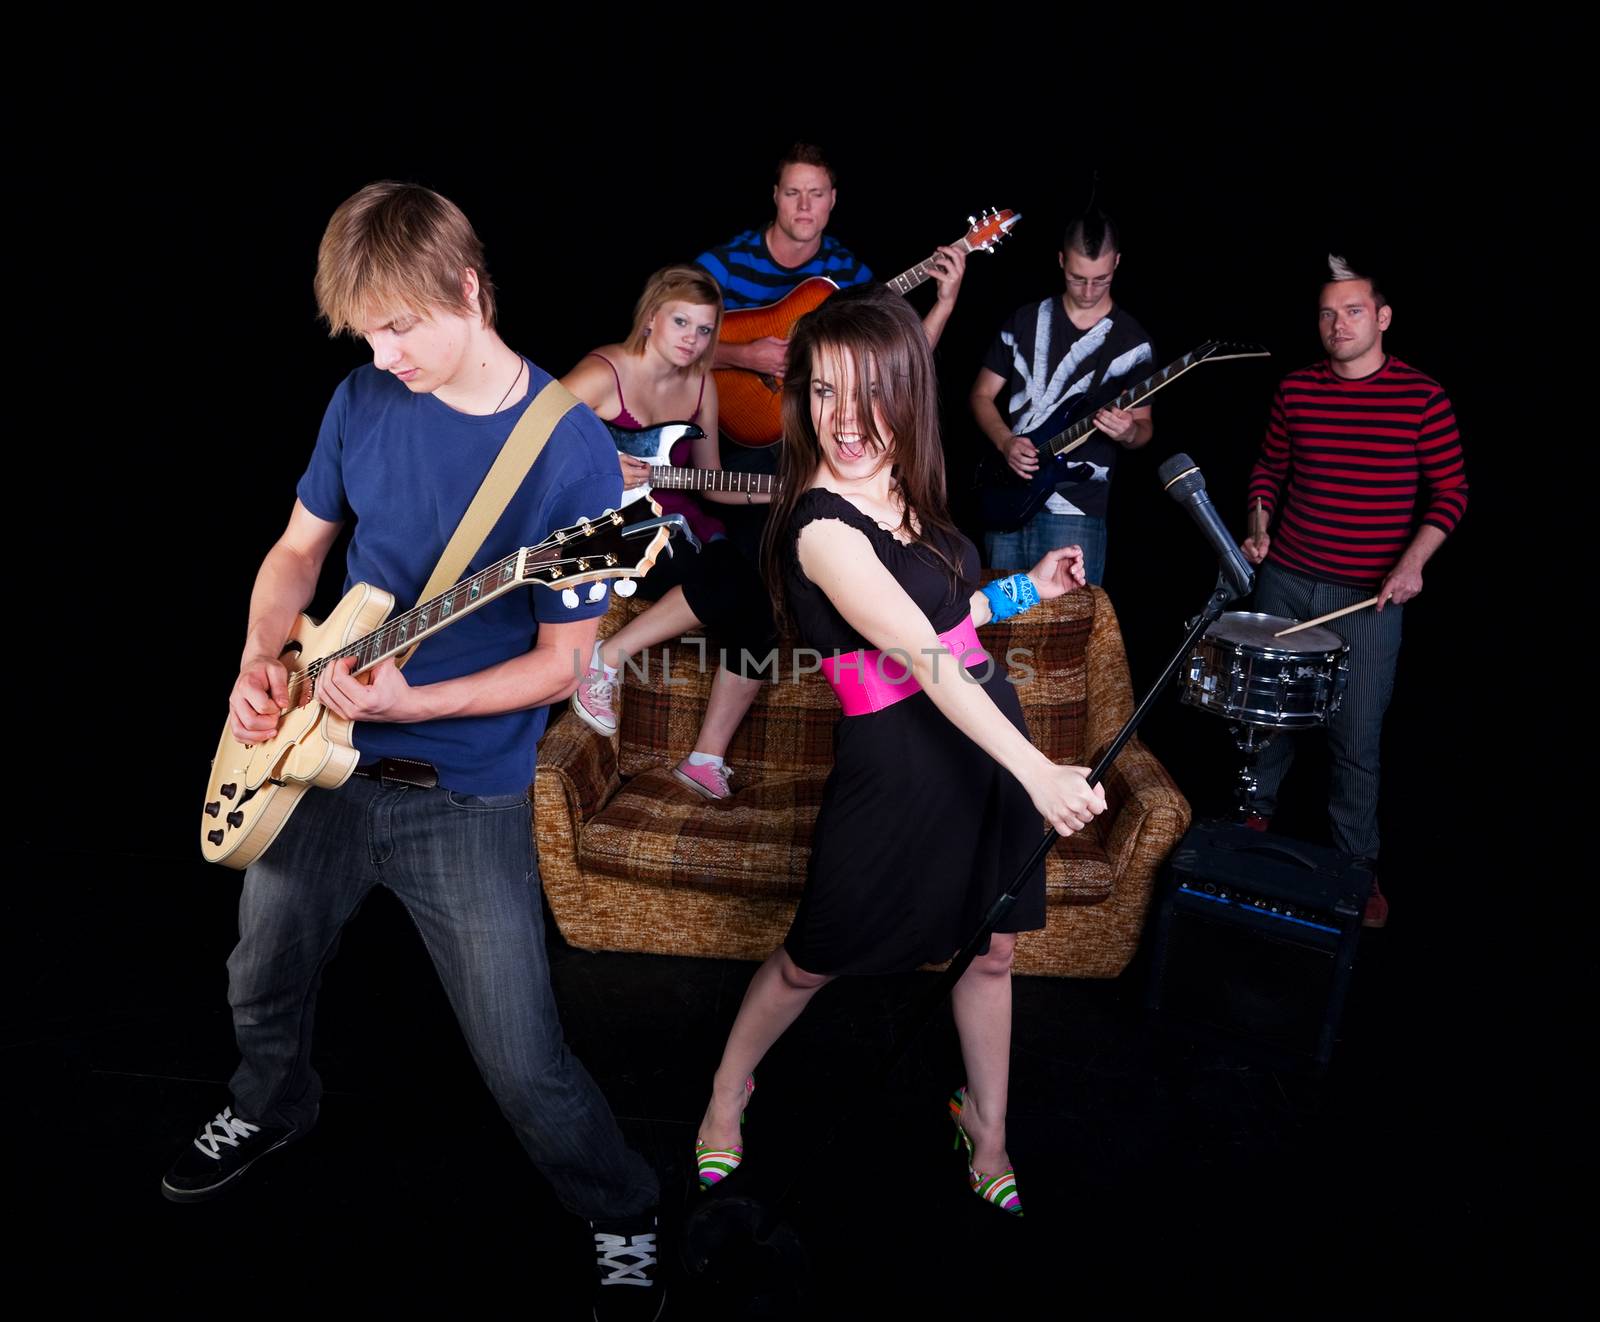 Six teens in a high school rock band practicing on a stage.